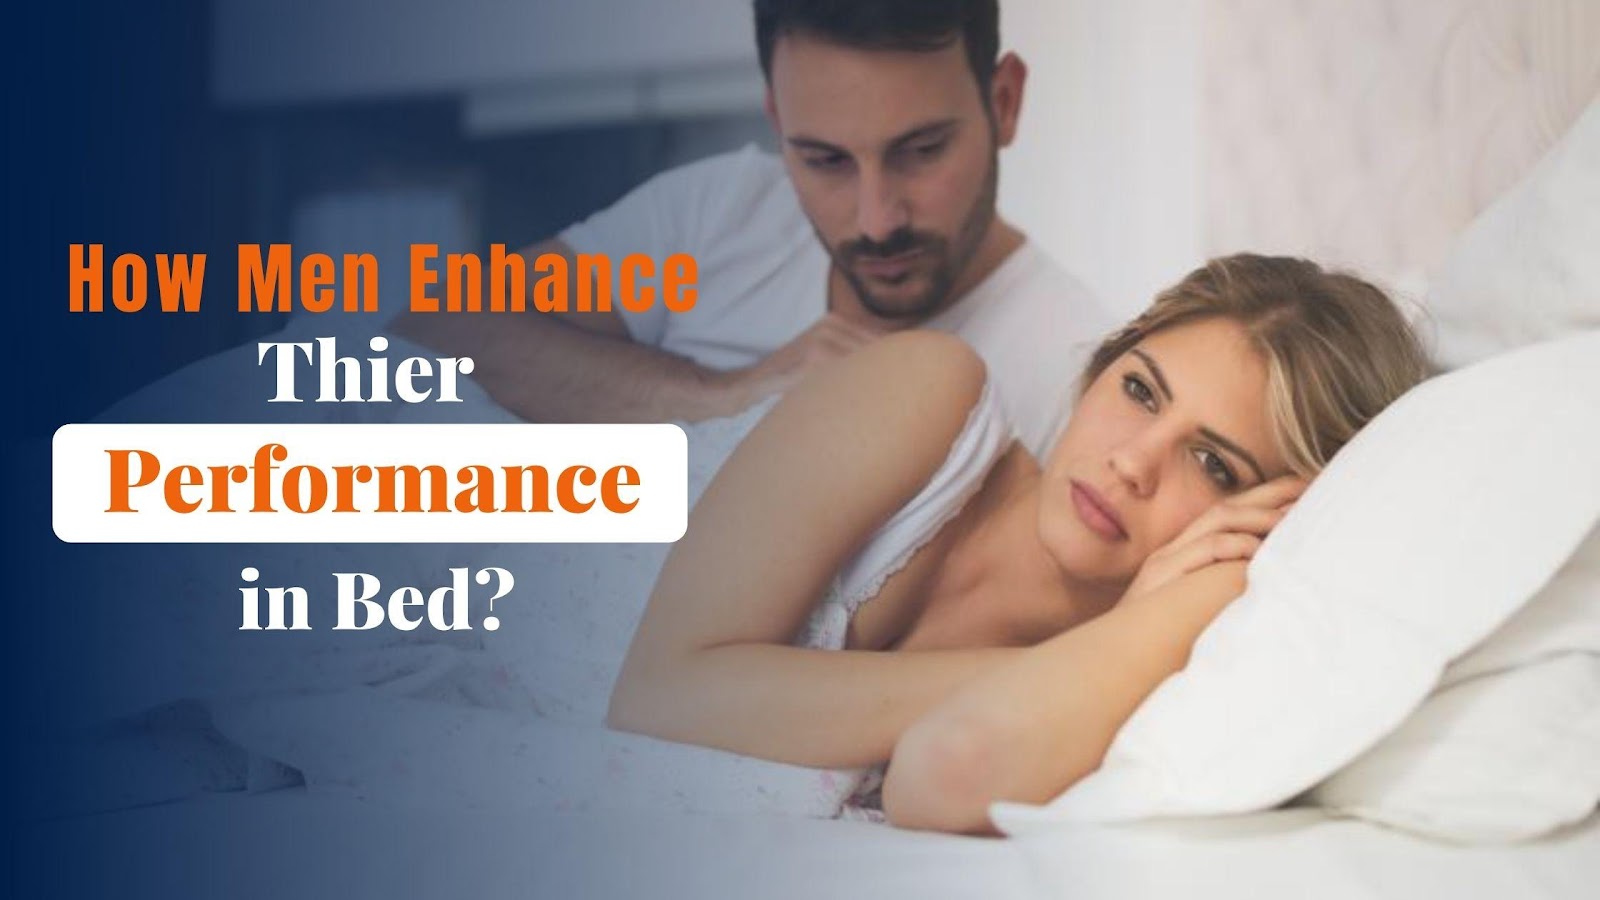 C:\Users\Admin\Downloads\How Men Can Enhance Their Performance in Bed.jpg